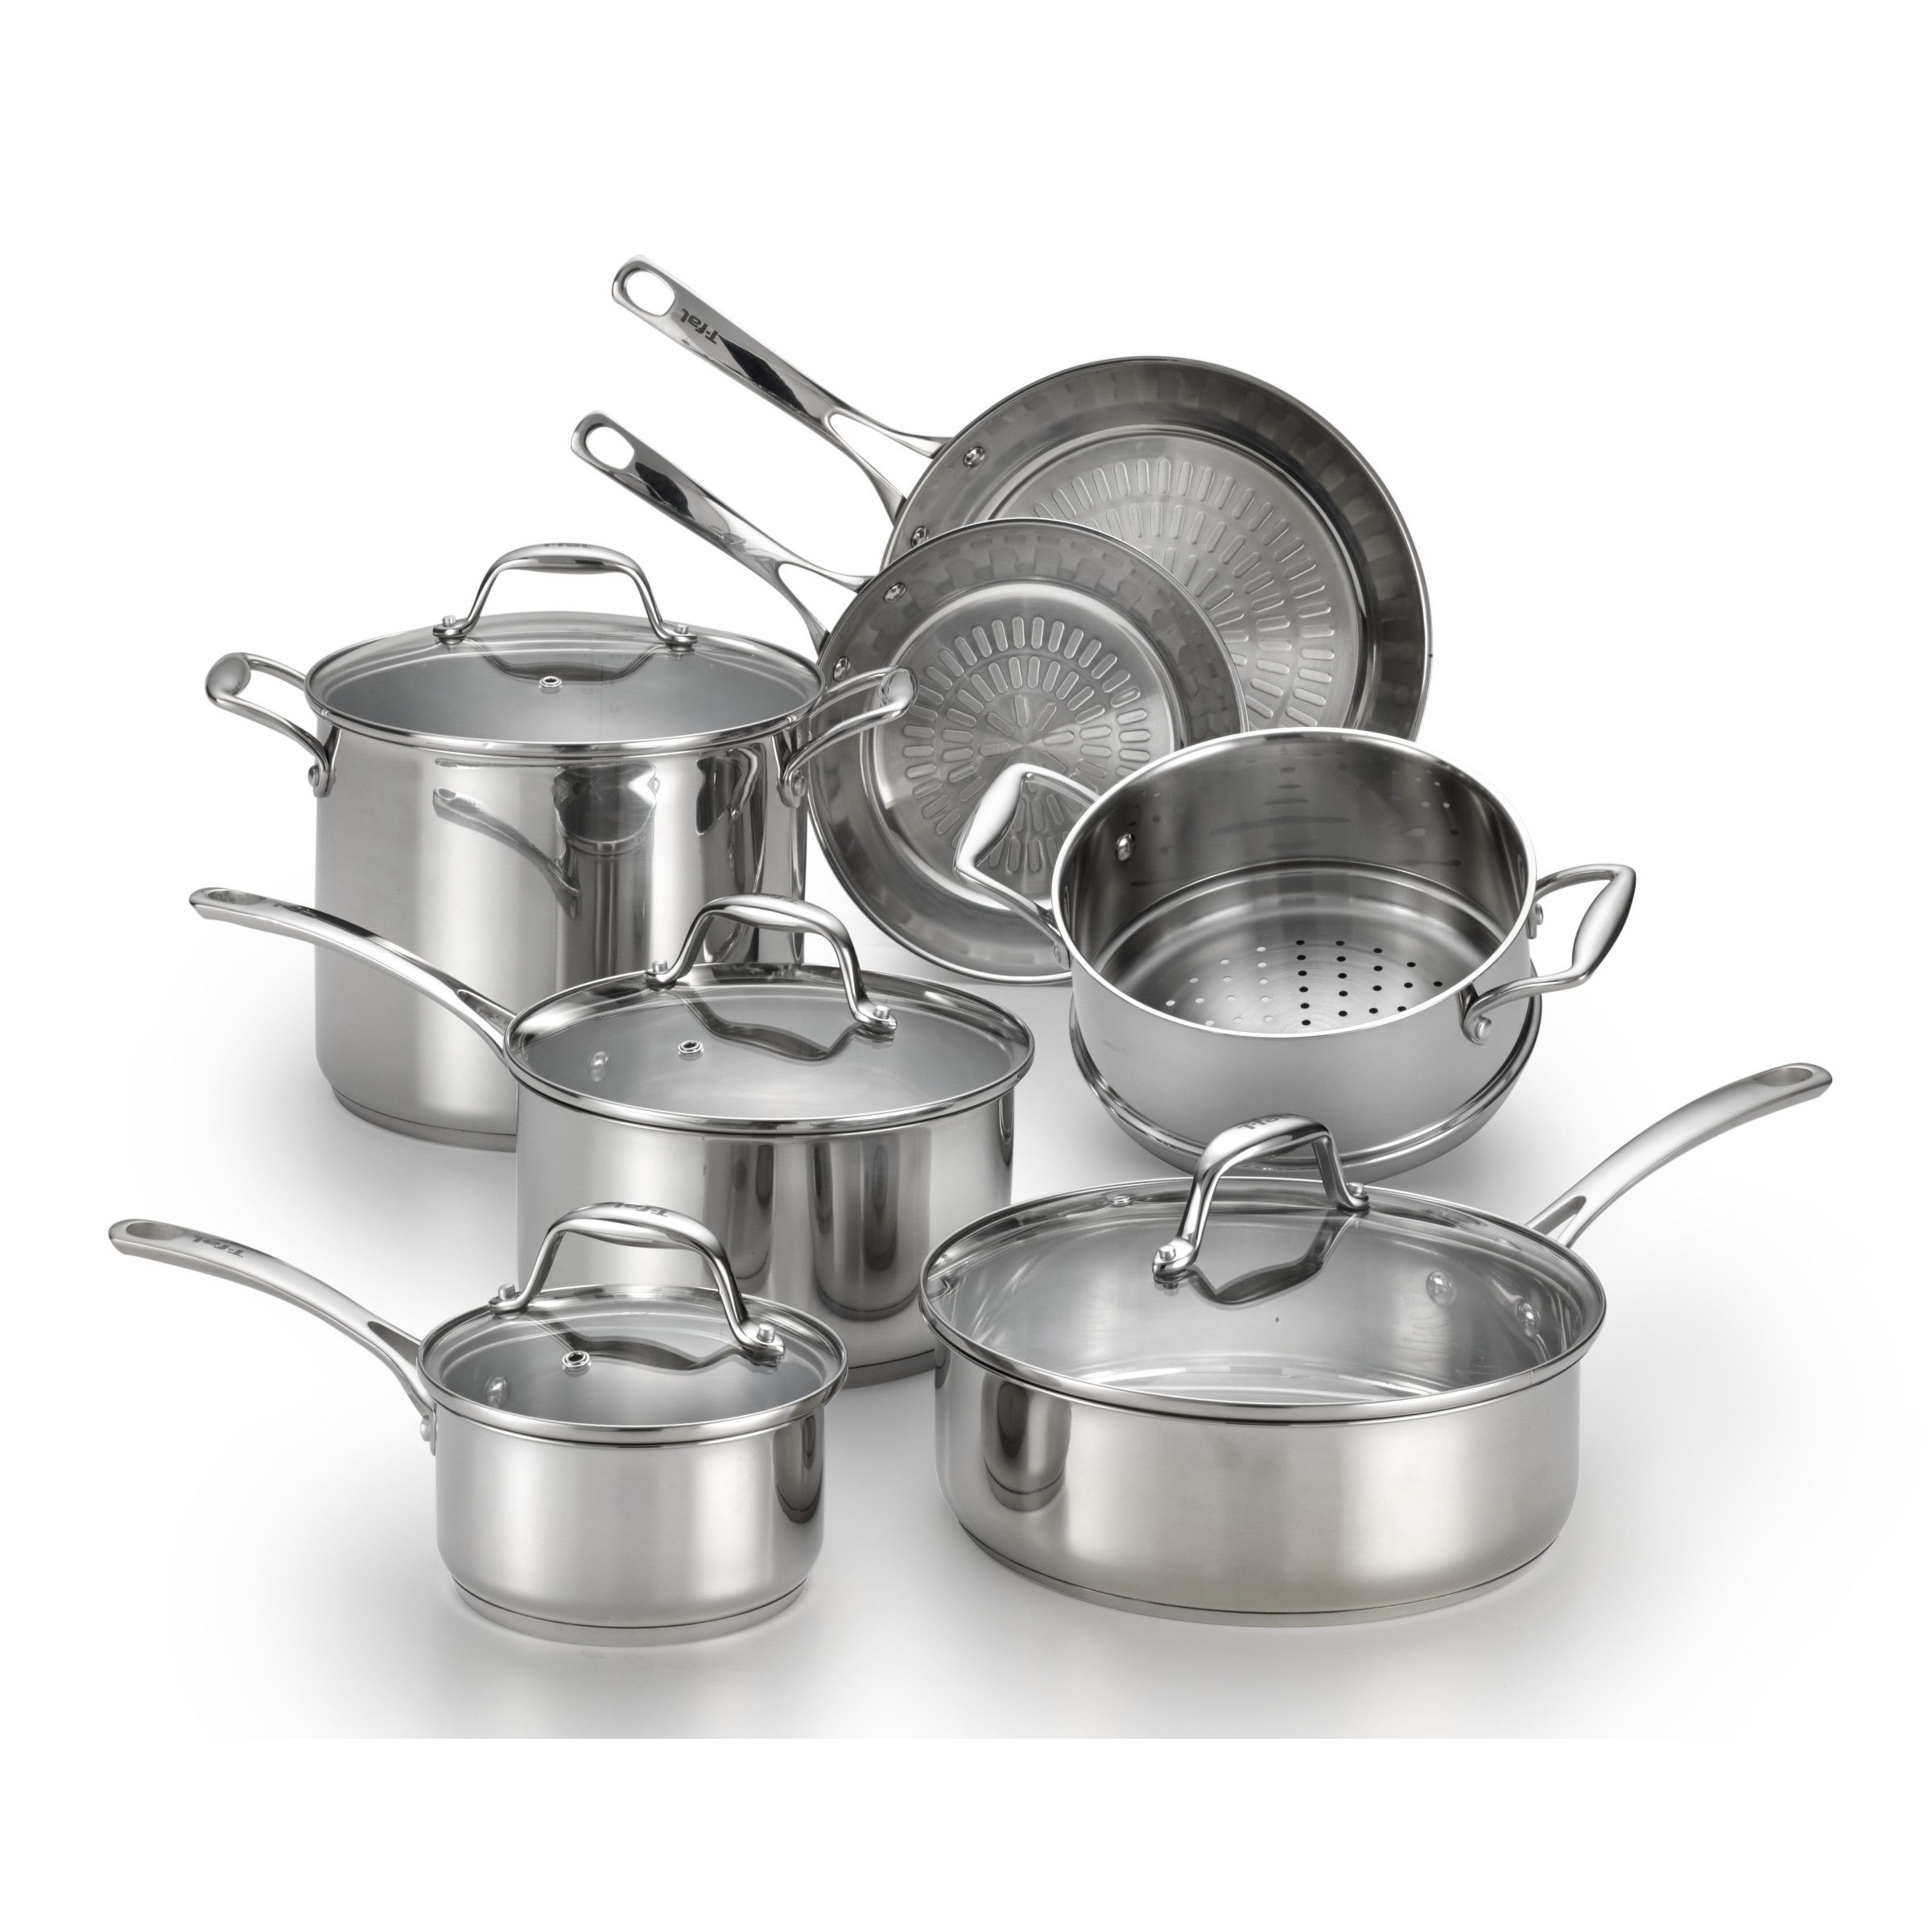 T-Fal Performa X 11-Pc. Stainless Steel Cookware Set